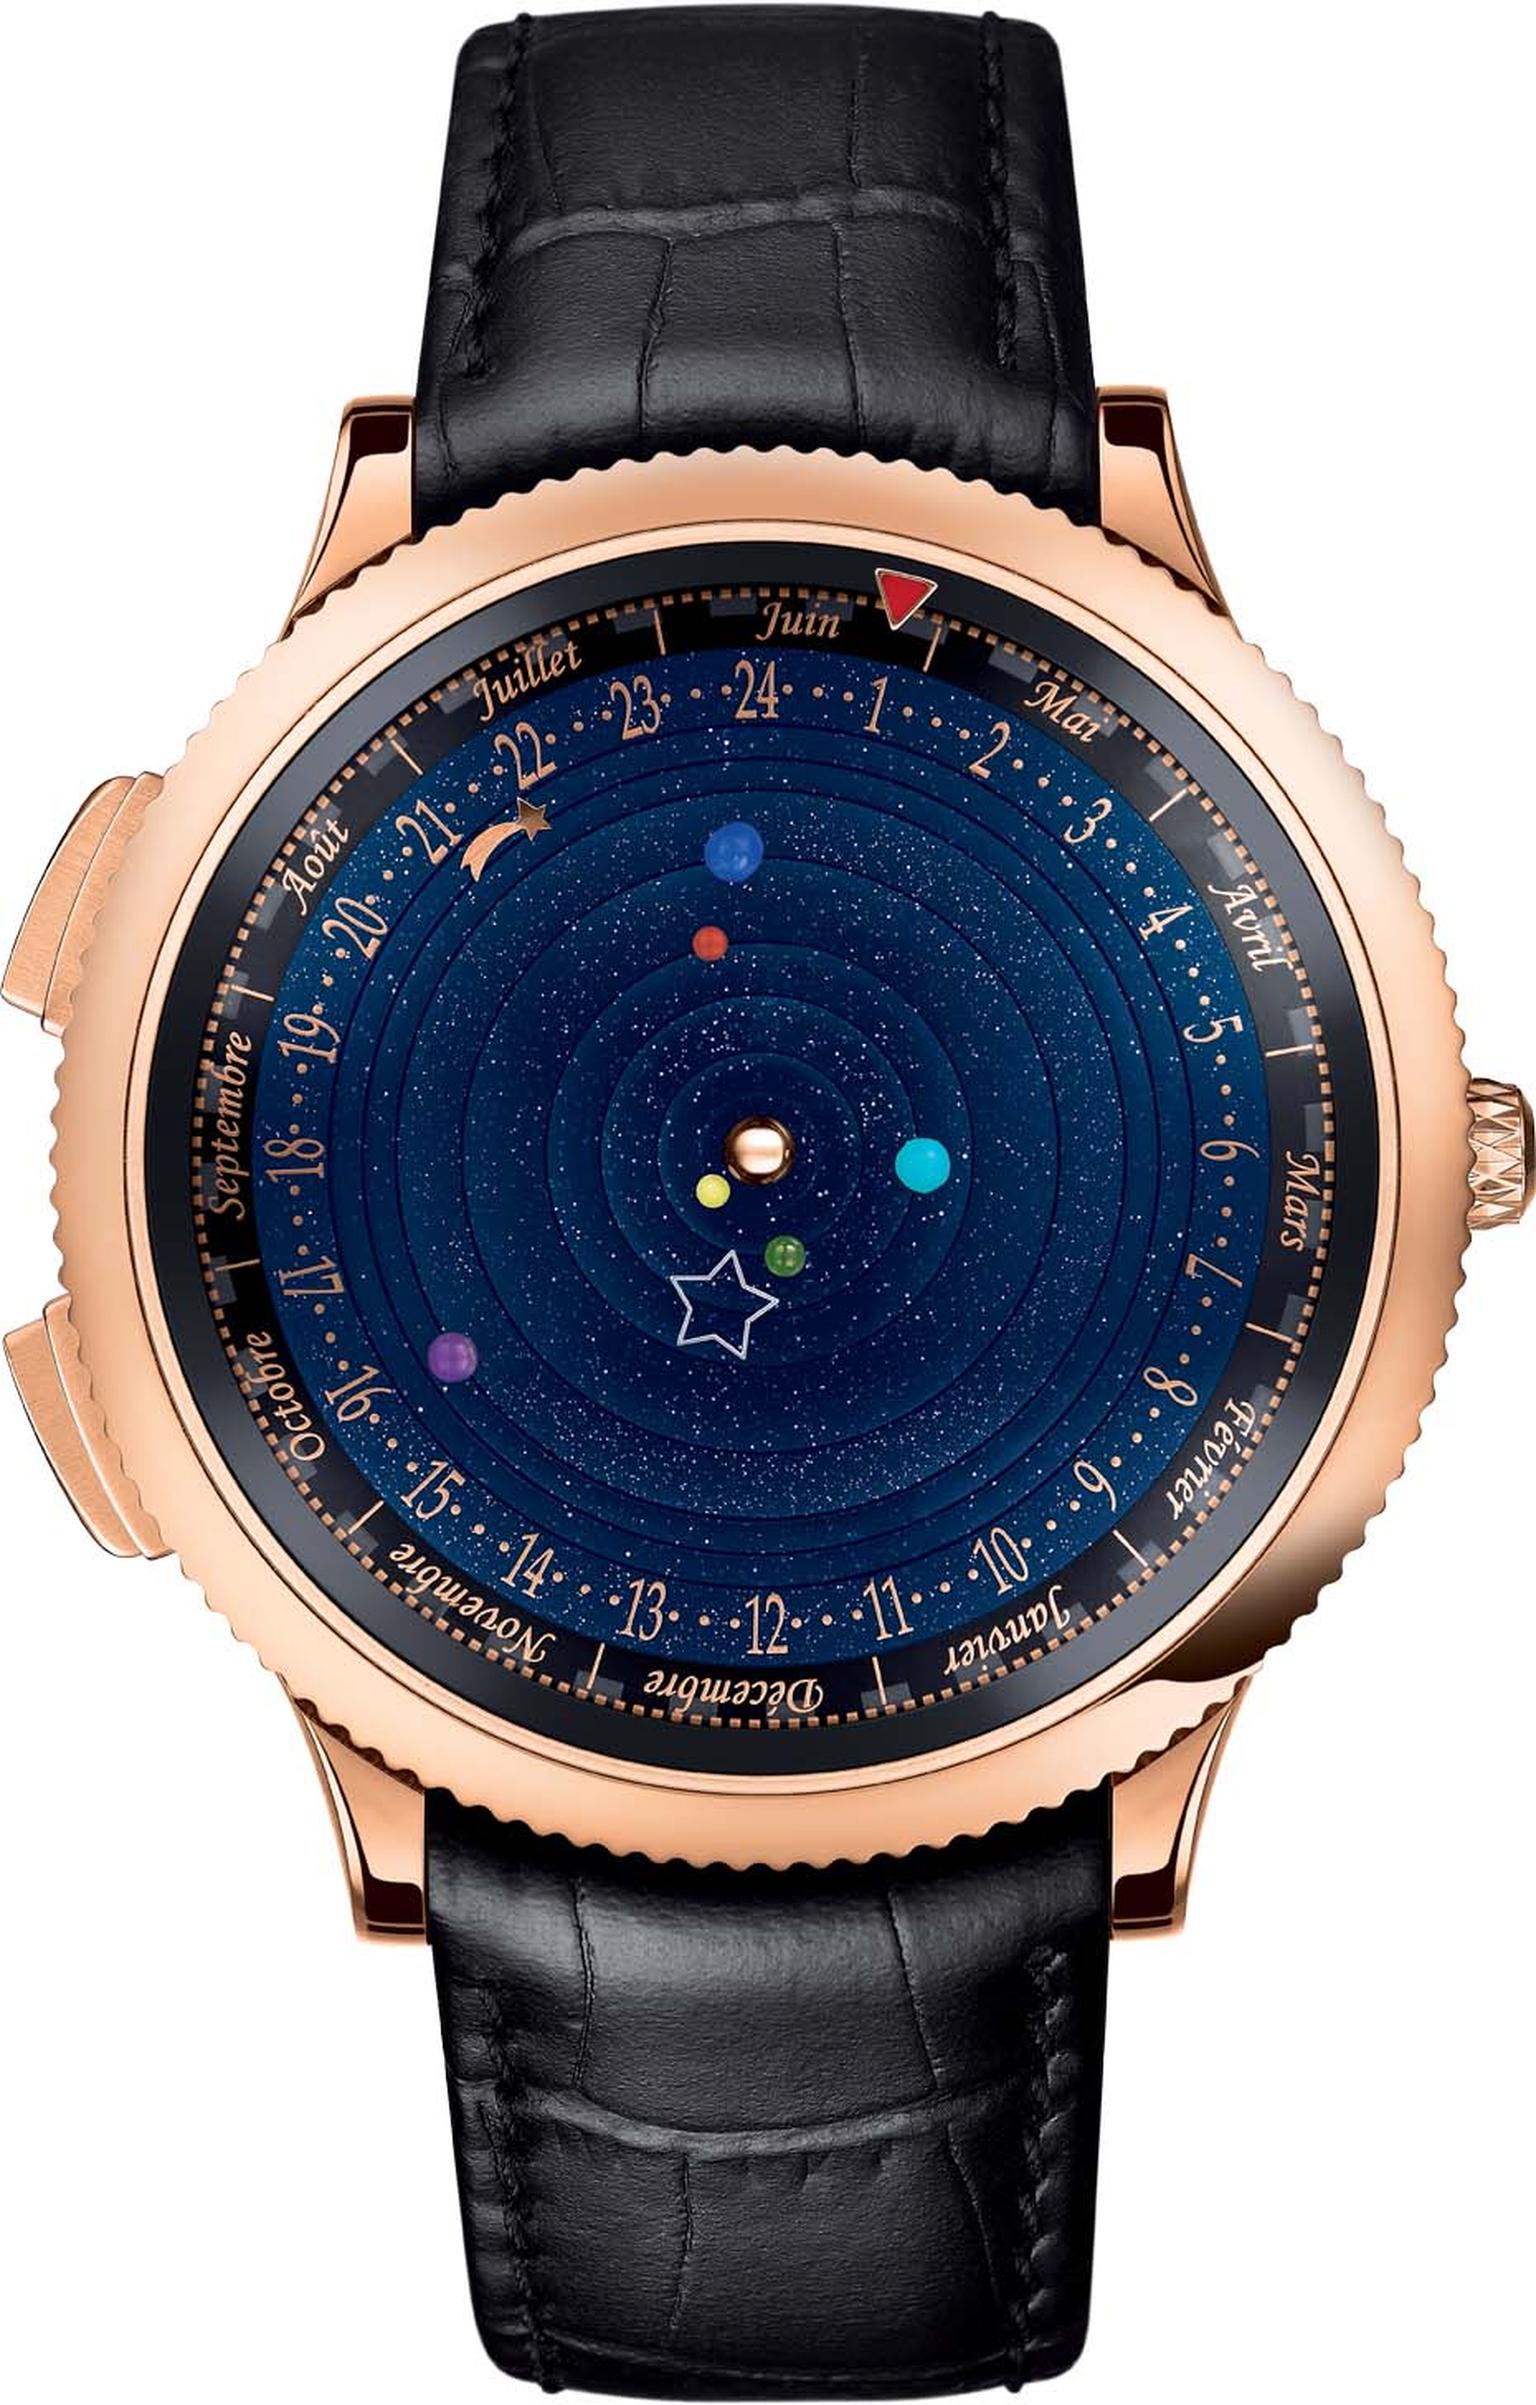 Van Cleef & Arpels' Midnight Planétarium watch features an aventurine dial with six tiny spheres representing six planets that rotate at different speeds, with Saturn taking 29 years to complete its rotation.